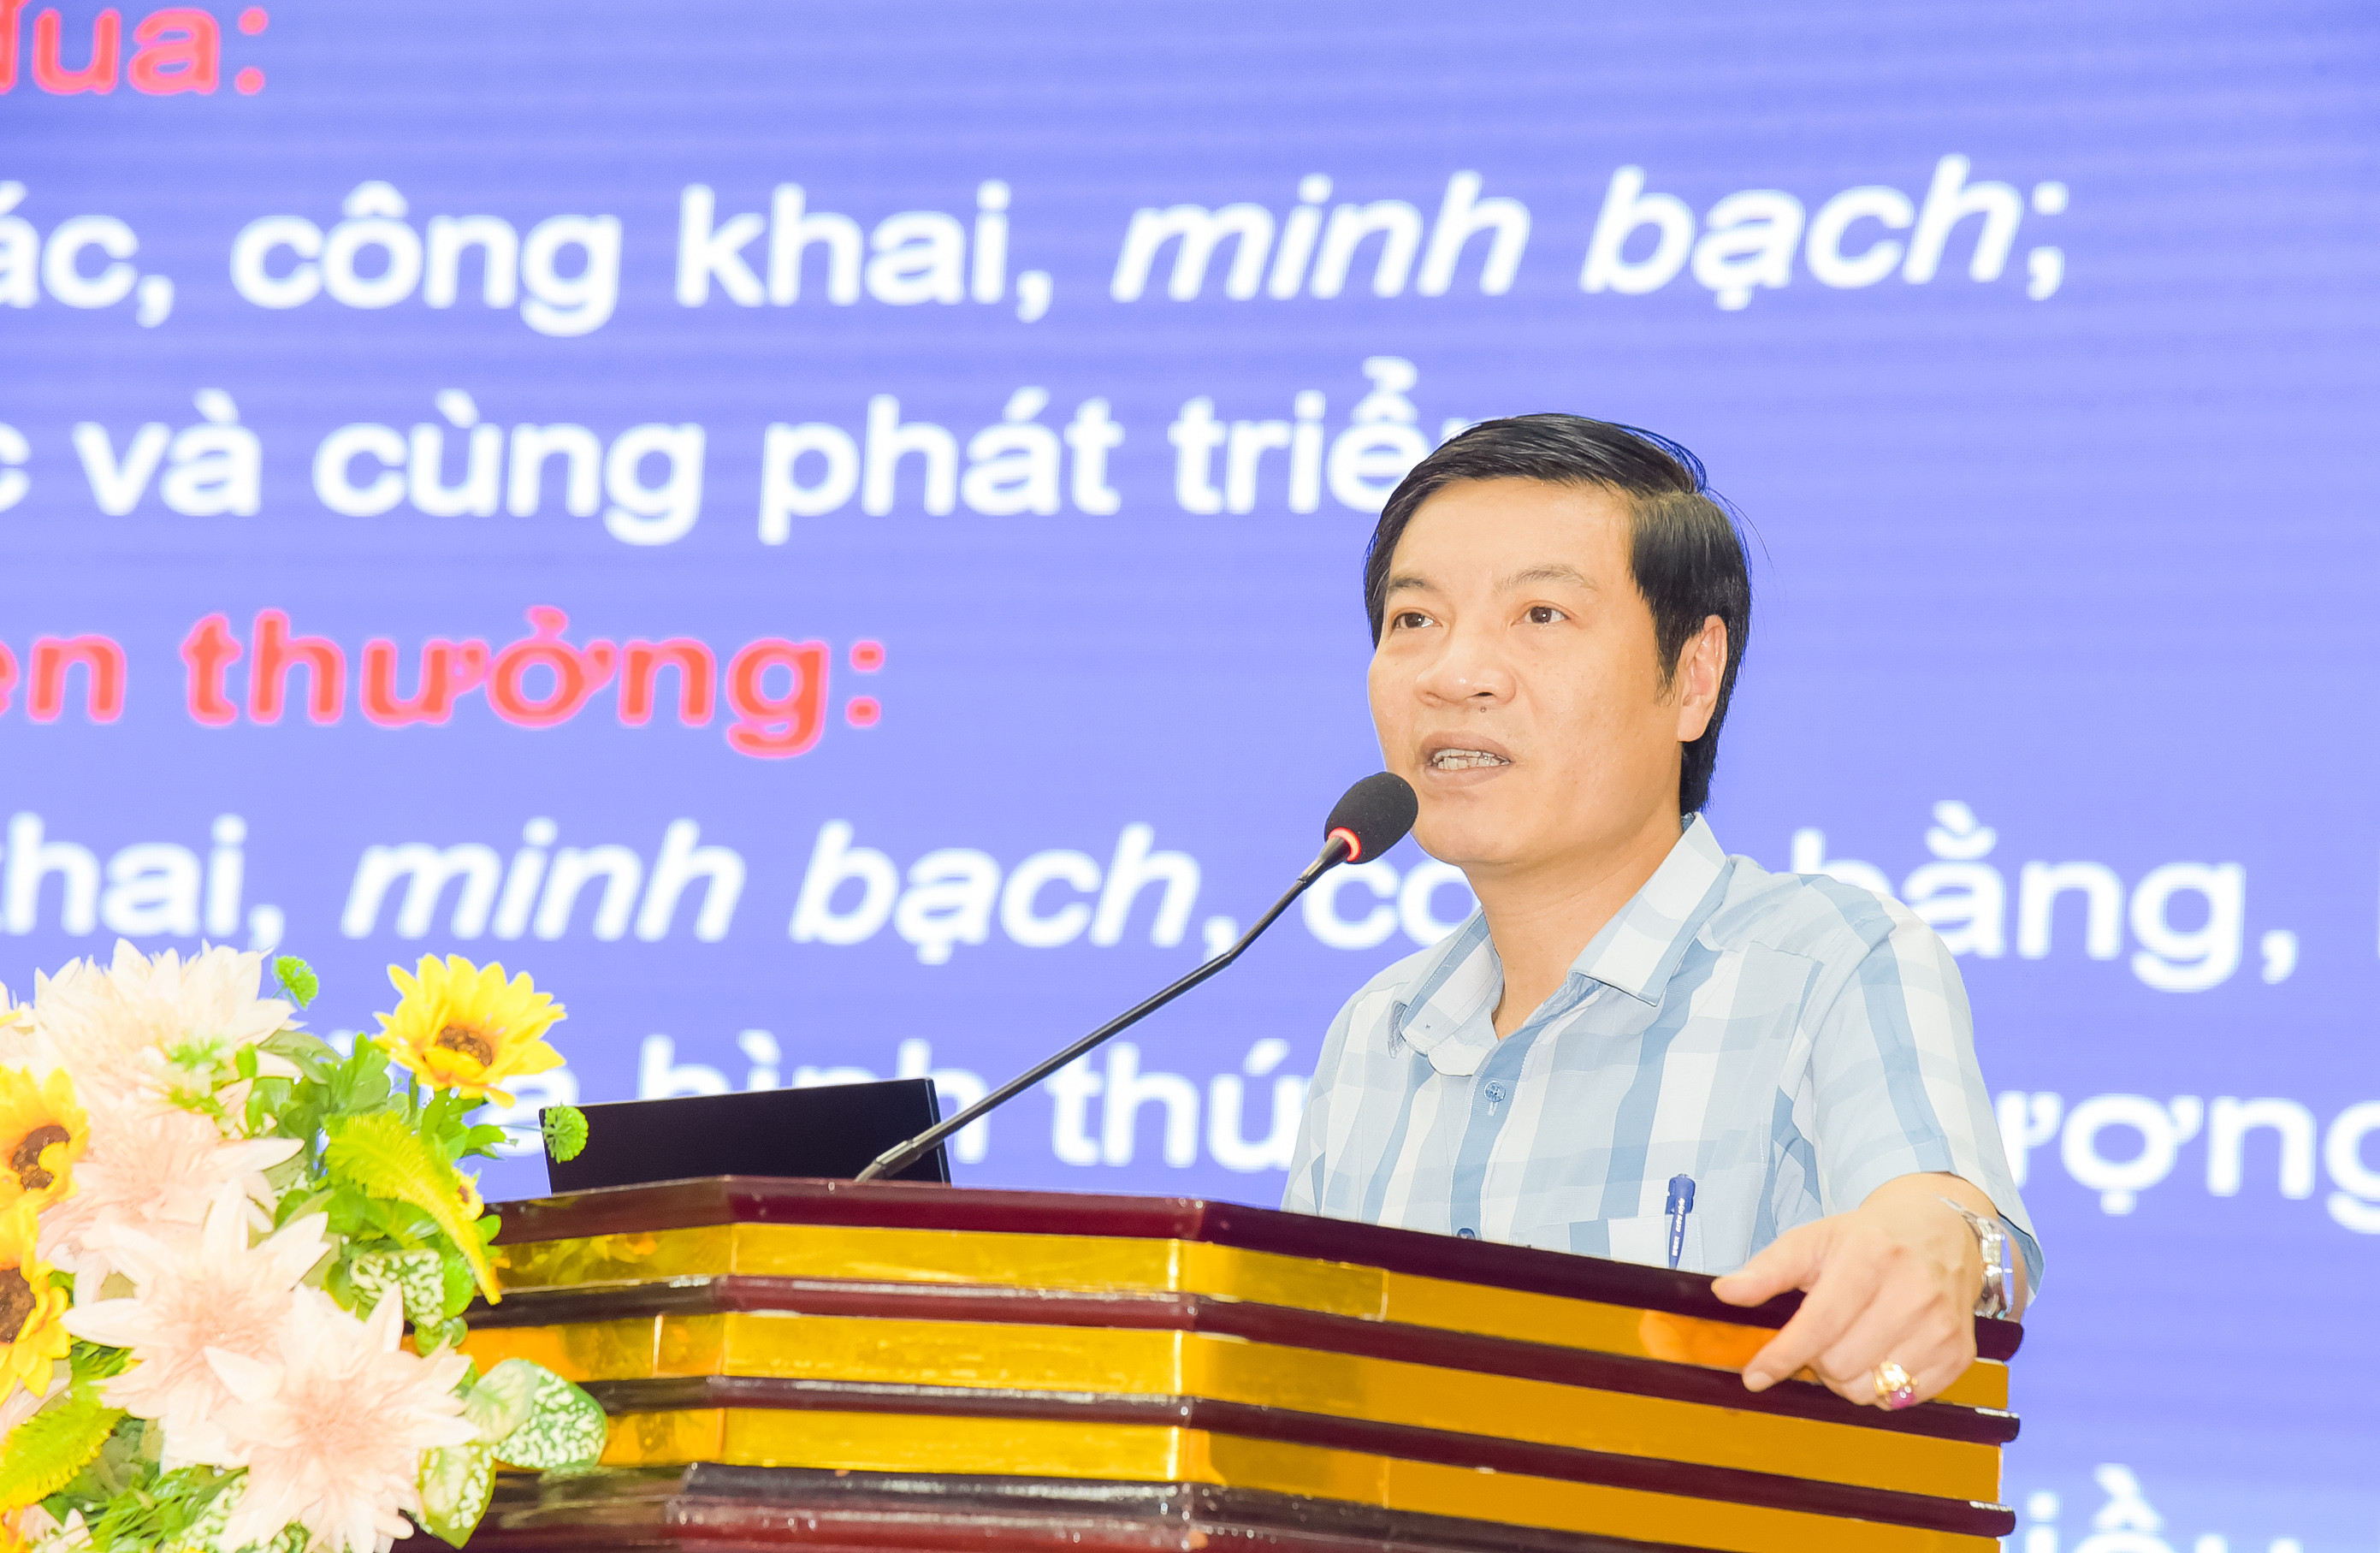 bna_ athanh. anh thanh le.jpg